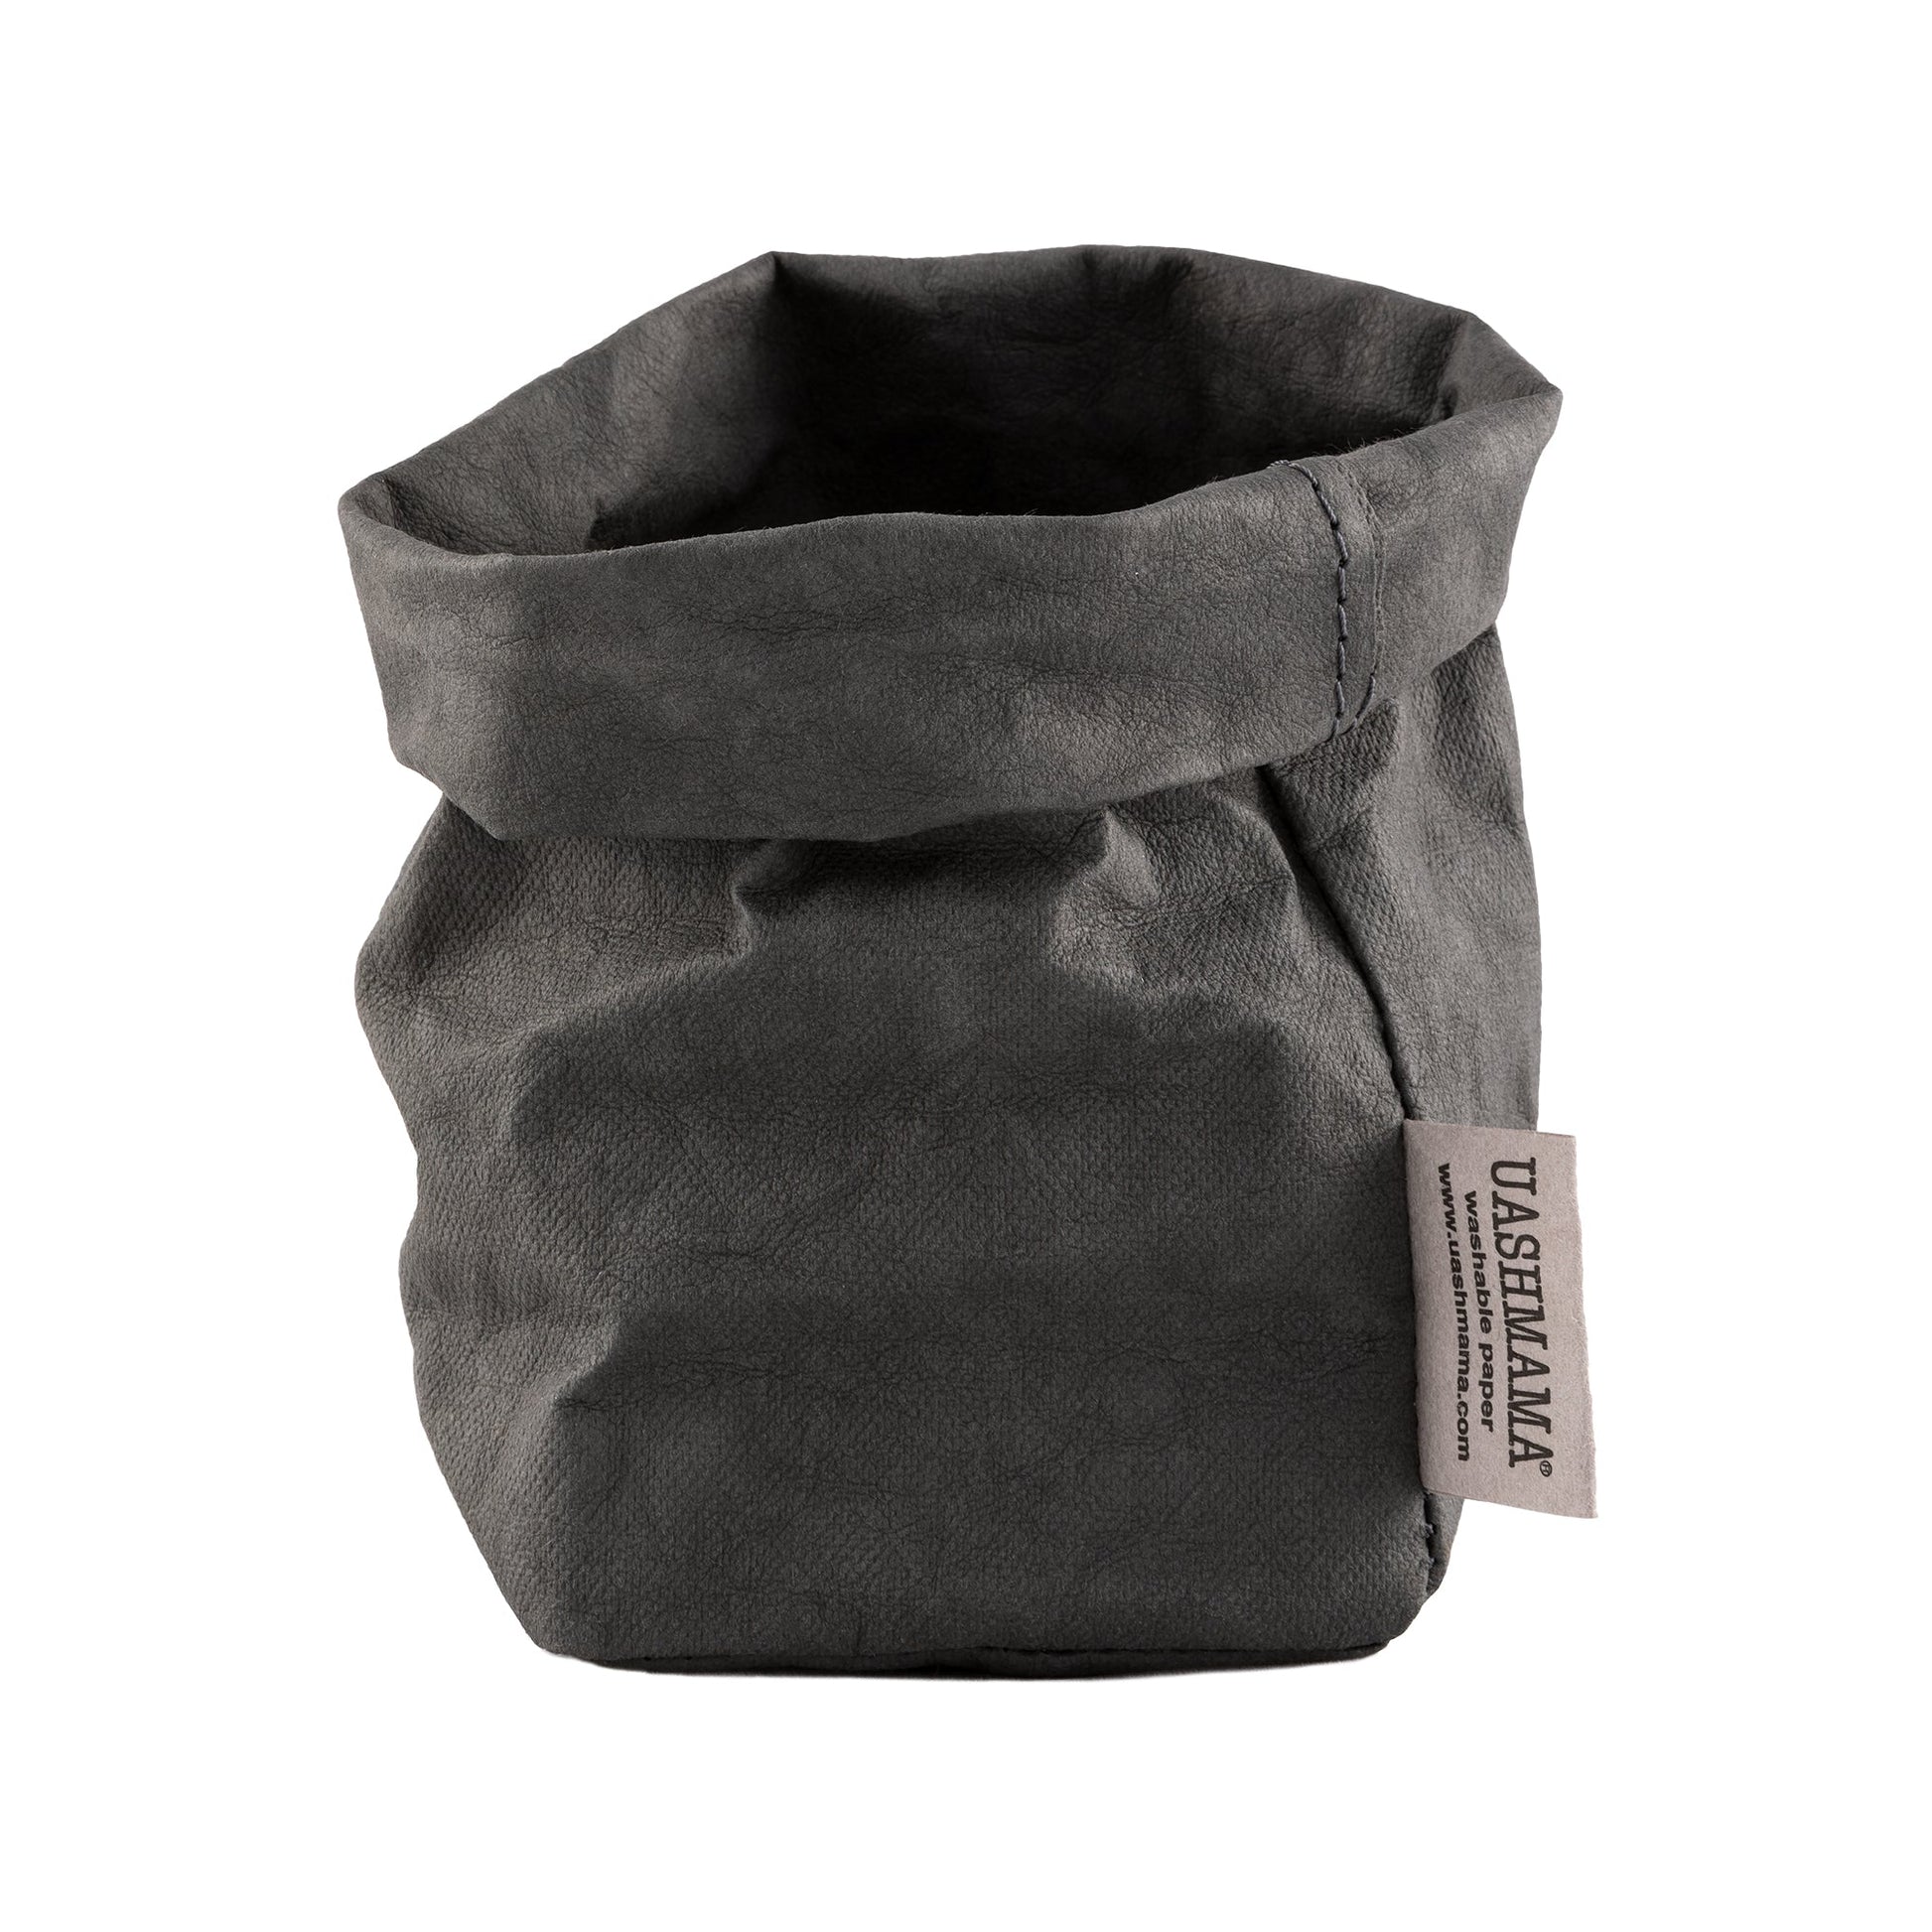 A washable paper bag is shown. The bag is rolled down at the top and features a UASHMAMA logo label on the bottom left corner. The bag pictured is the piccolo size in dark grey.